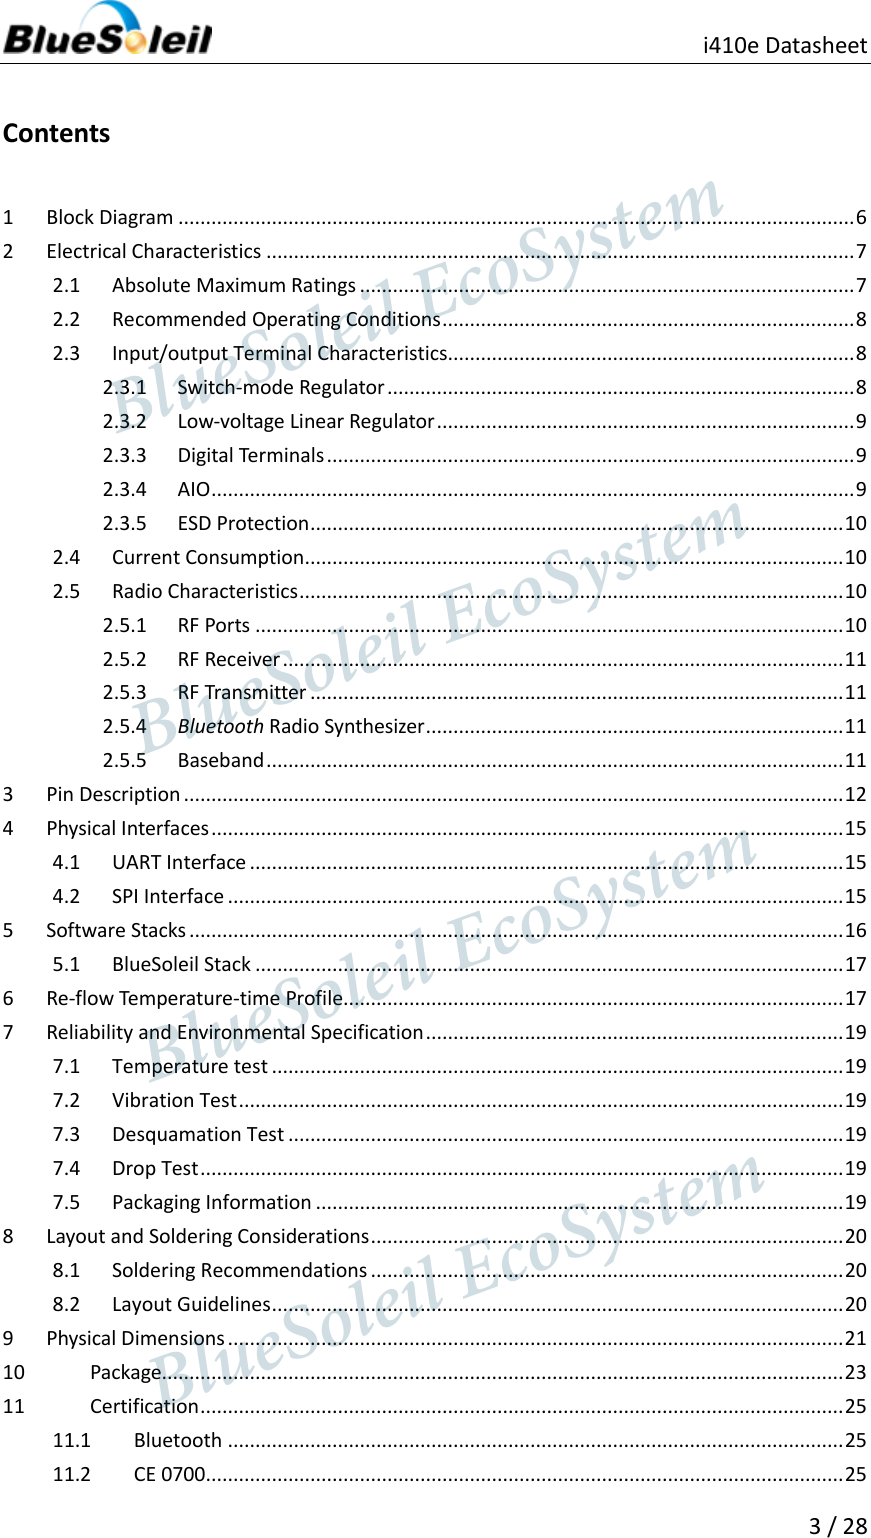                                               i410e Datasheet   3 / 28  Contents 1  Block Diagram ........................................................................................................................... 6 2  Electrical Characteristics ........................................................................................................... 7 2.1  Absolute Maximum Ratings .......................................................................................... 7 2.2  Recommended Operating Conditions ........................................................................... 8 2.3  Input/output Terminal Characteristics.......................................................................... 8 2.3.1  Switch-mode Regulator ..................................................................................... 8 2.3.2  Low-voltage Linear Regulator ............................................................................ 9 2.3.3  Digital Terminals ................................................................................................ 9 2.3.4  AIO ..................................................................................................................... 9 2.3.5  ESD Protection ................................................................................................. 10 2.4  Current Consumption .................................................................................................. 10 2.5  Radio Characteristics ................................................................................................... 10 2.5.1  RF Ports ........................................................................................................... 10 2.5.2  RF Receiver ...................................................................................................... 11 2.5.3  RF Transmitter ................................................................................................. 11 2.5.4  Bluetooth Radio Synthesizer ............................................................................ 11 2.5.5  Baseband ......................................................................................................... 11 3  Pin Description ........................................................................................................................ 12 4  Physical Interfaces ................................................................................................................... 15 4.1  UART Interface ............................................................................................................ 15 4.2  SPI Interface ................................................................................................................ 15 5  Software Stacks ....................................................................................................................... 16 5.1  BlueSoleil Stack ........................................................................................................... 17 6  Re-flow Temperature-time Profile........................................................................................... 17 7  Reliability and Environmental Specification ............................................................................ 19 7.1  Temperature test ........................................................................................................ 19 7.2  Vibration Test .............................................................................................................. 19 7.3  Desquamation Test ..................................................................................................... 19 7.4  Drop Test ..................................................................................................................... 19 7.5  Packaging Information ................................................................................................ 19 8  Layout and Soldering Considerations ...................................................................................... 20 8.1  Soldering Recommendations ...................................................................................... 20 8.2  Layout Guidelines ........................................................................................................ 20 9  Physical Dimensions ................................................................................................................ 21 10  Package............................................................................................................................ 23 11  Certification ..................................................................................................................... 25 11.1  Bluetooth ................................................................................................................ 25 11.2  CE 0700.................................................................................................................... 25                  BlueSoleil EcoSystem            BlueSoleil EcoSystem      BlueSoleil EcoSystemBlueSoleil EcoSystem